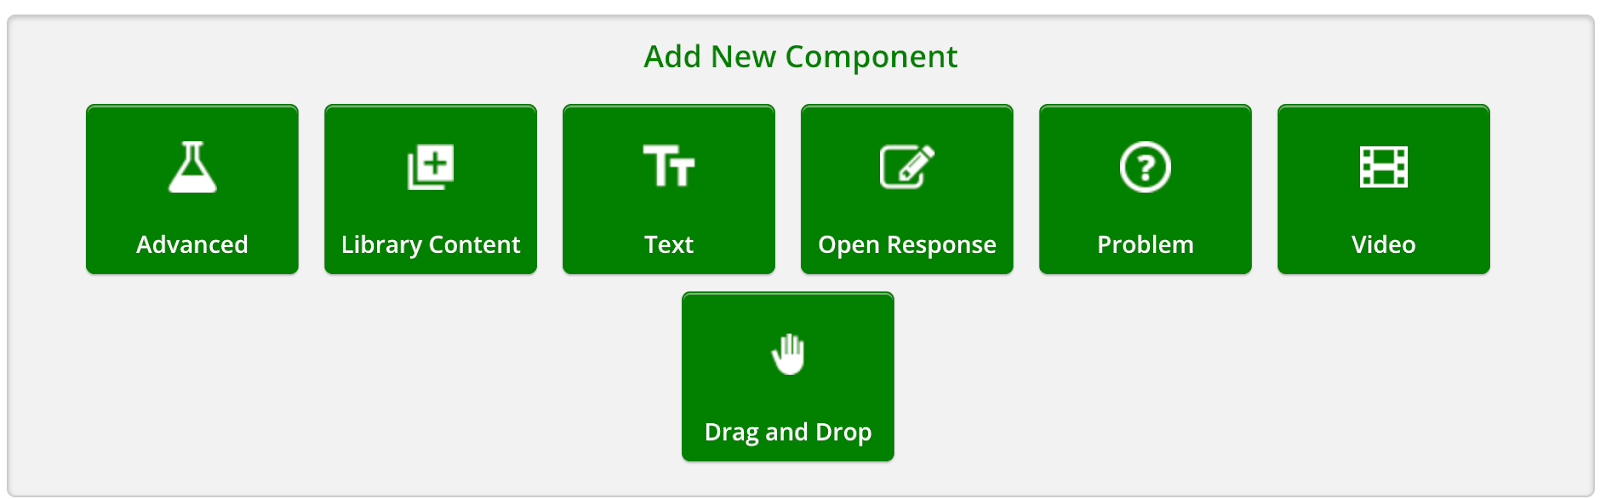 this is an image of several components that you can choose from, including the video component.